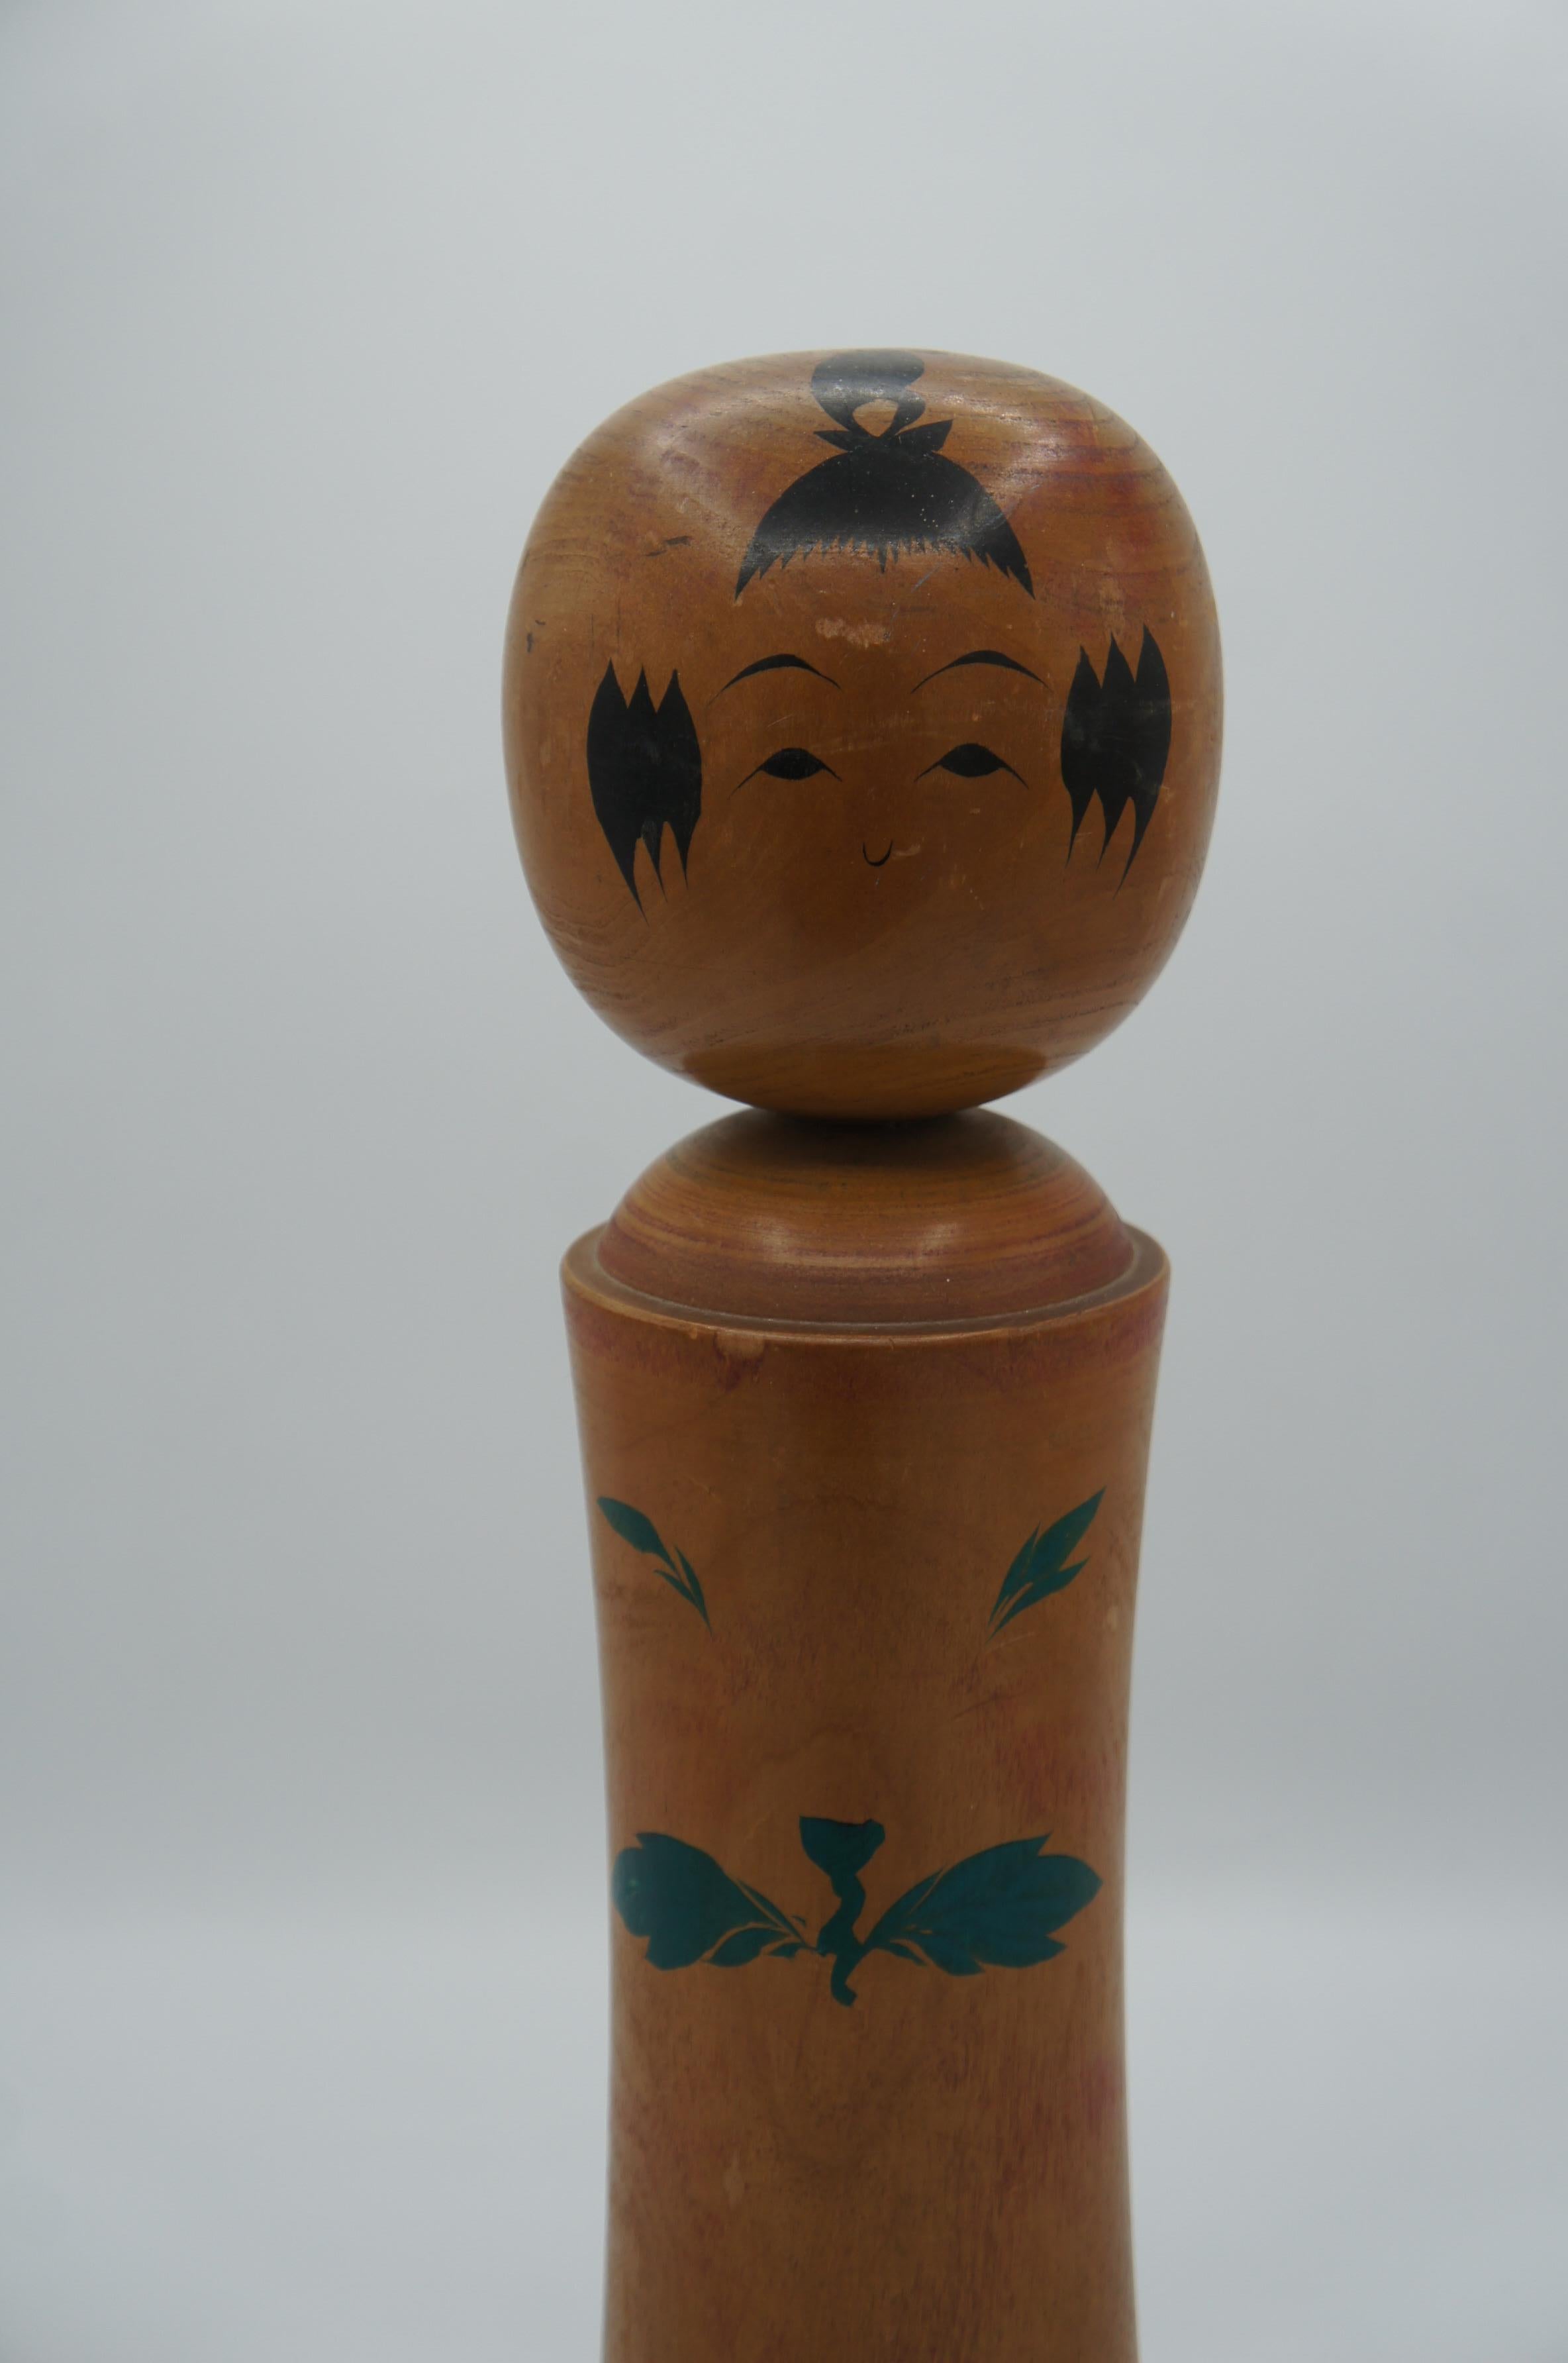 This is a wooden doll which was made in Japan around 1950 in Showa era. 
This kind of dolls are called Kokeshi in Japanese.
This kokeshi's style is Naruko from Miyagi prefecture.
This kokeshi was made by a kokeshi artist Takumi KUMAGAYA. You can